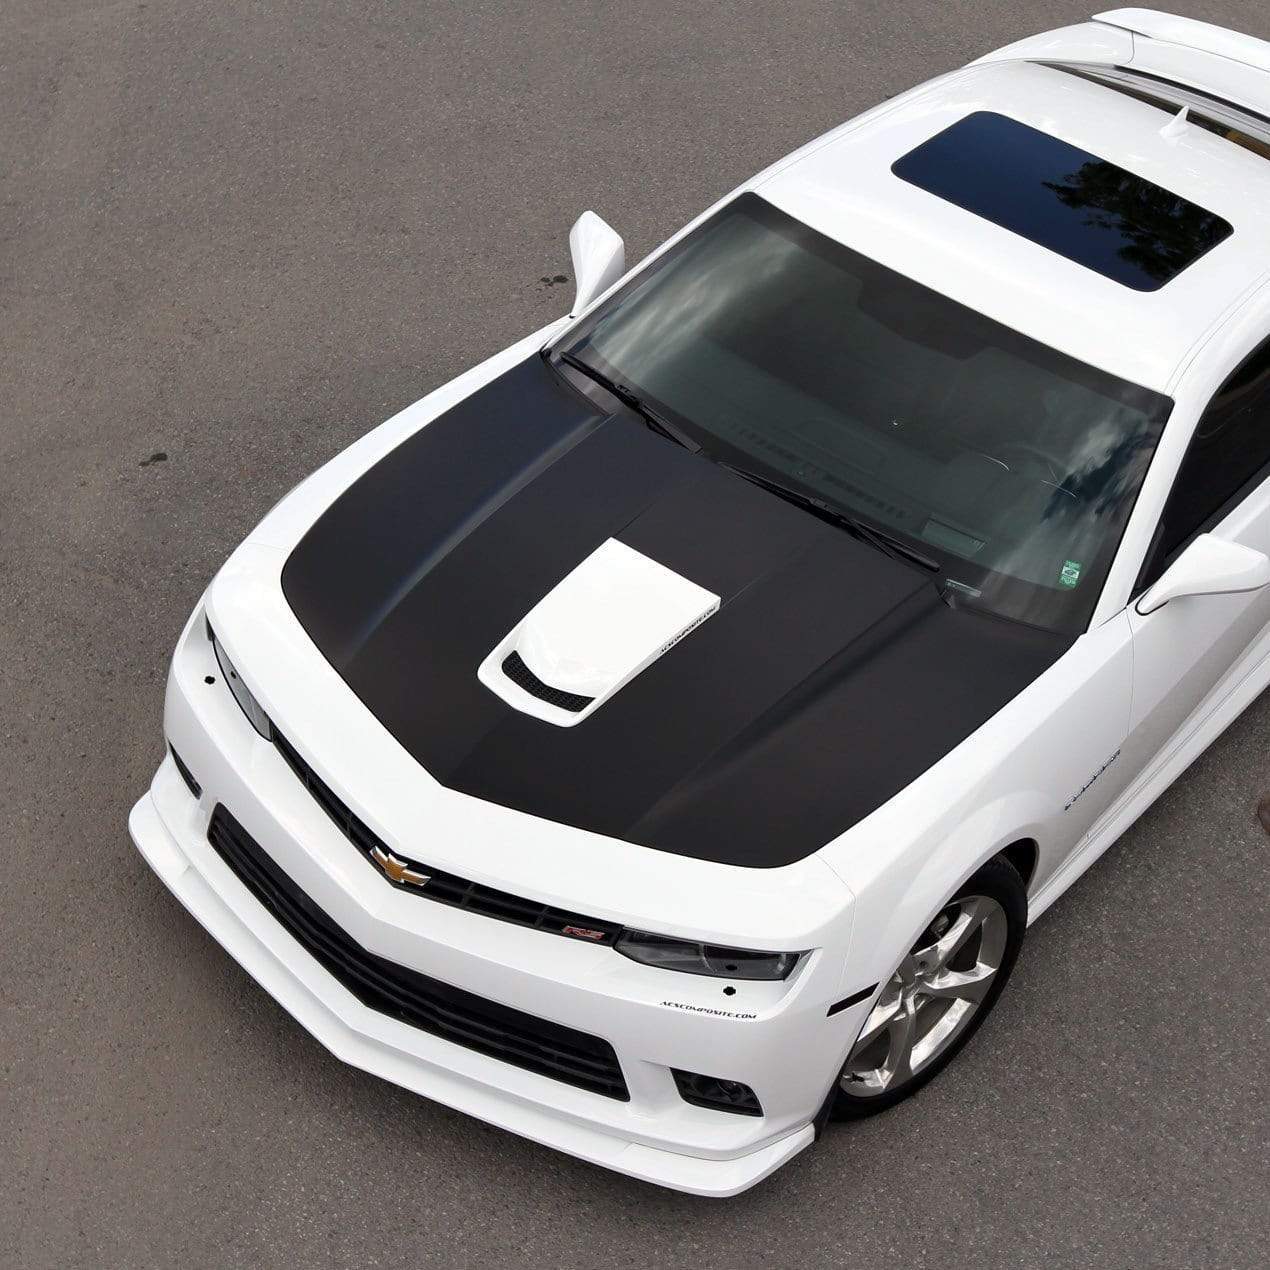 ACS-T4 Splitter for Camaro 2014-2015 SS in Satin Black (SKU: 46-4-001) enhances airflow and aggressive style.